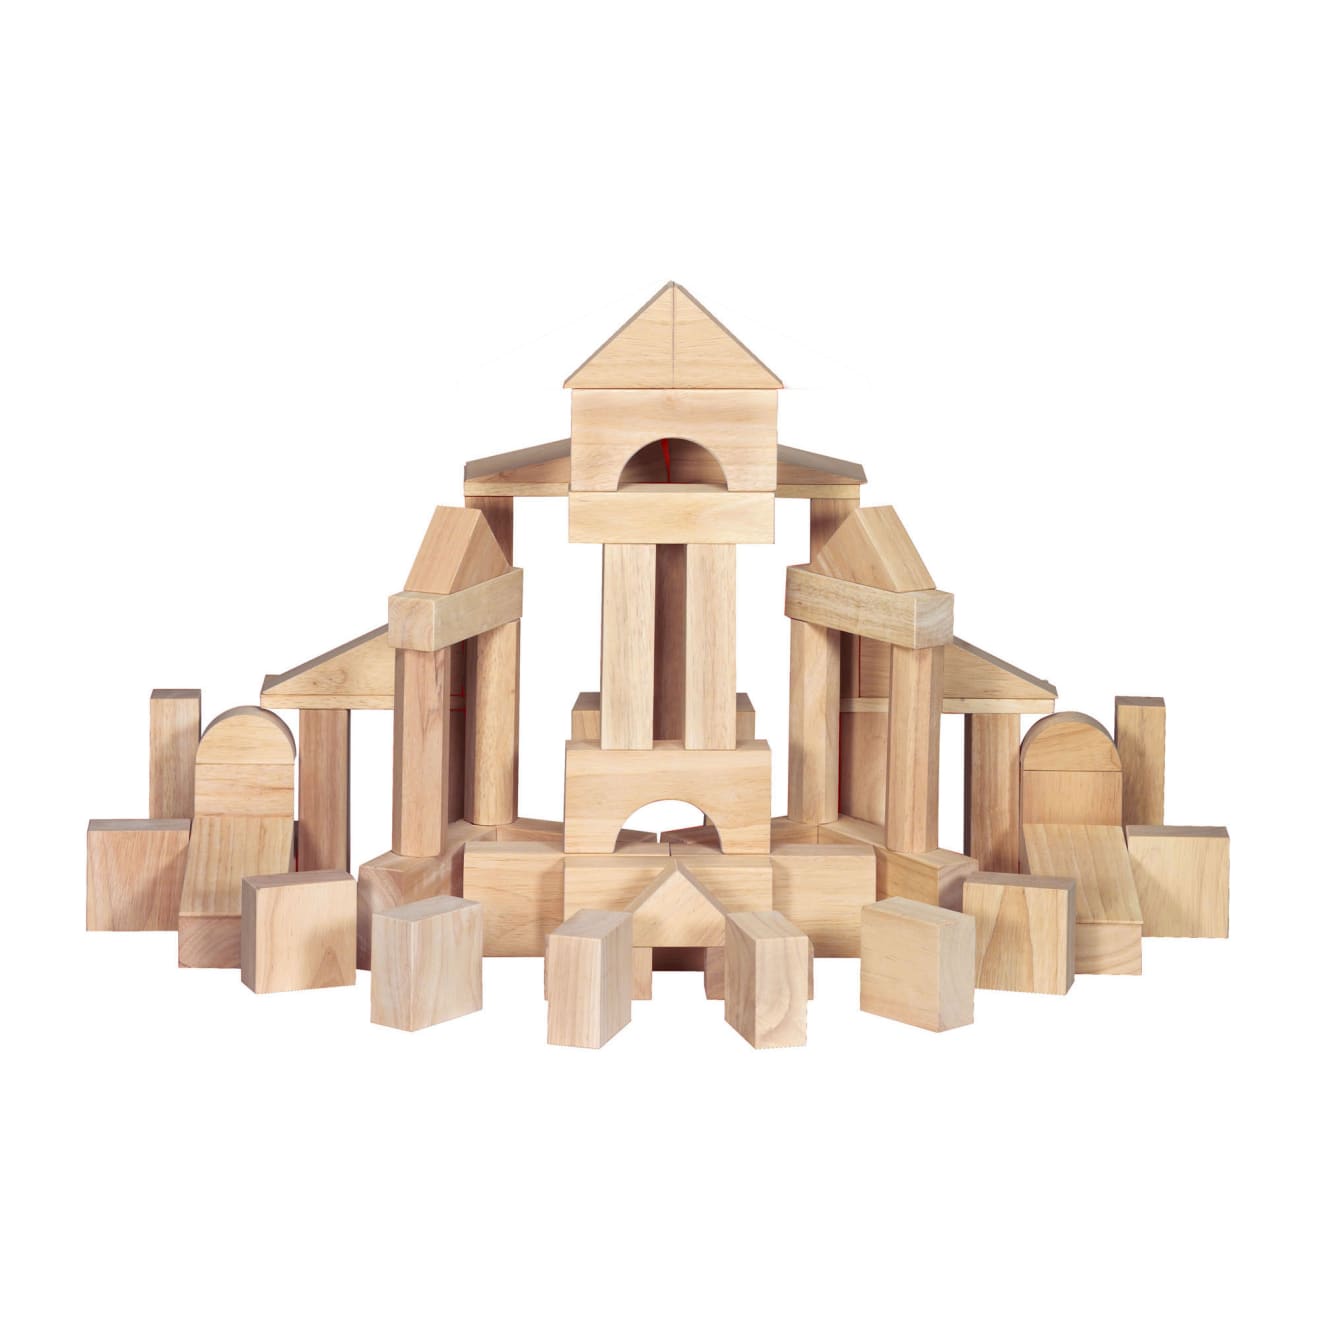 Safely Designed unfinished wood animal For Fun And Learning